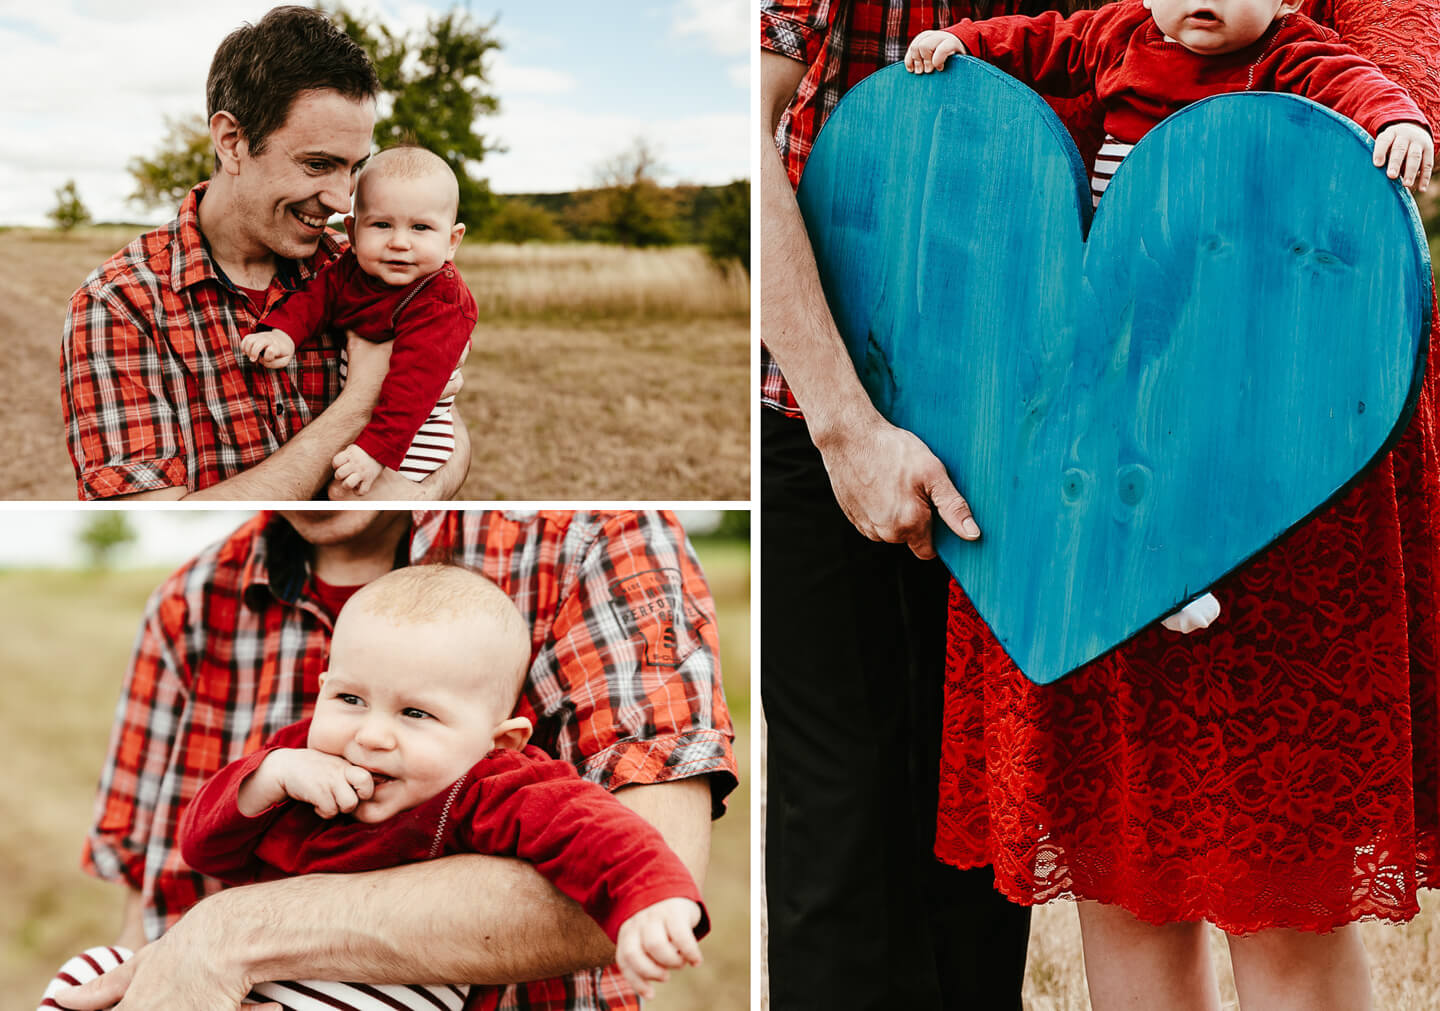 Familie-Weinberge-mitBaby-Portraits-5